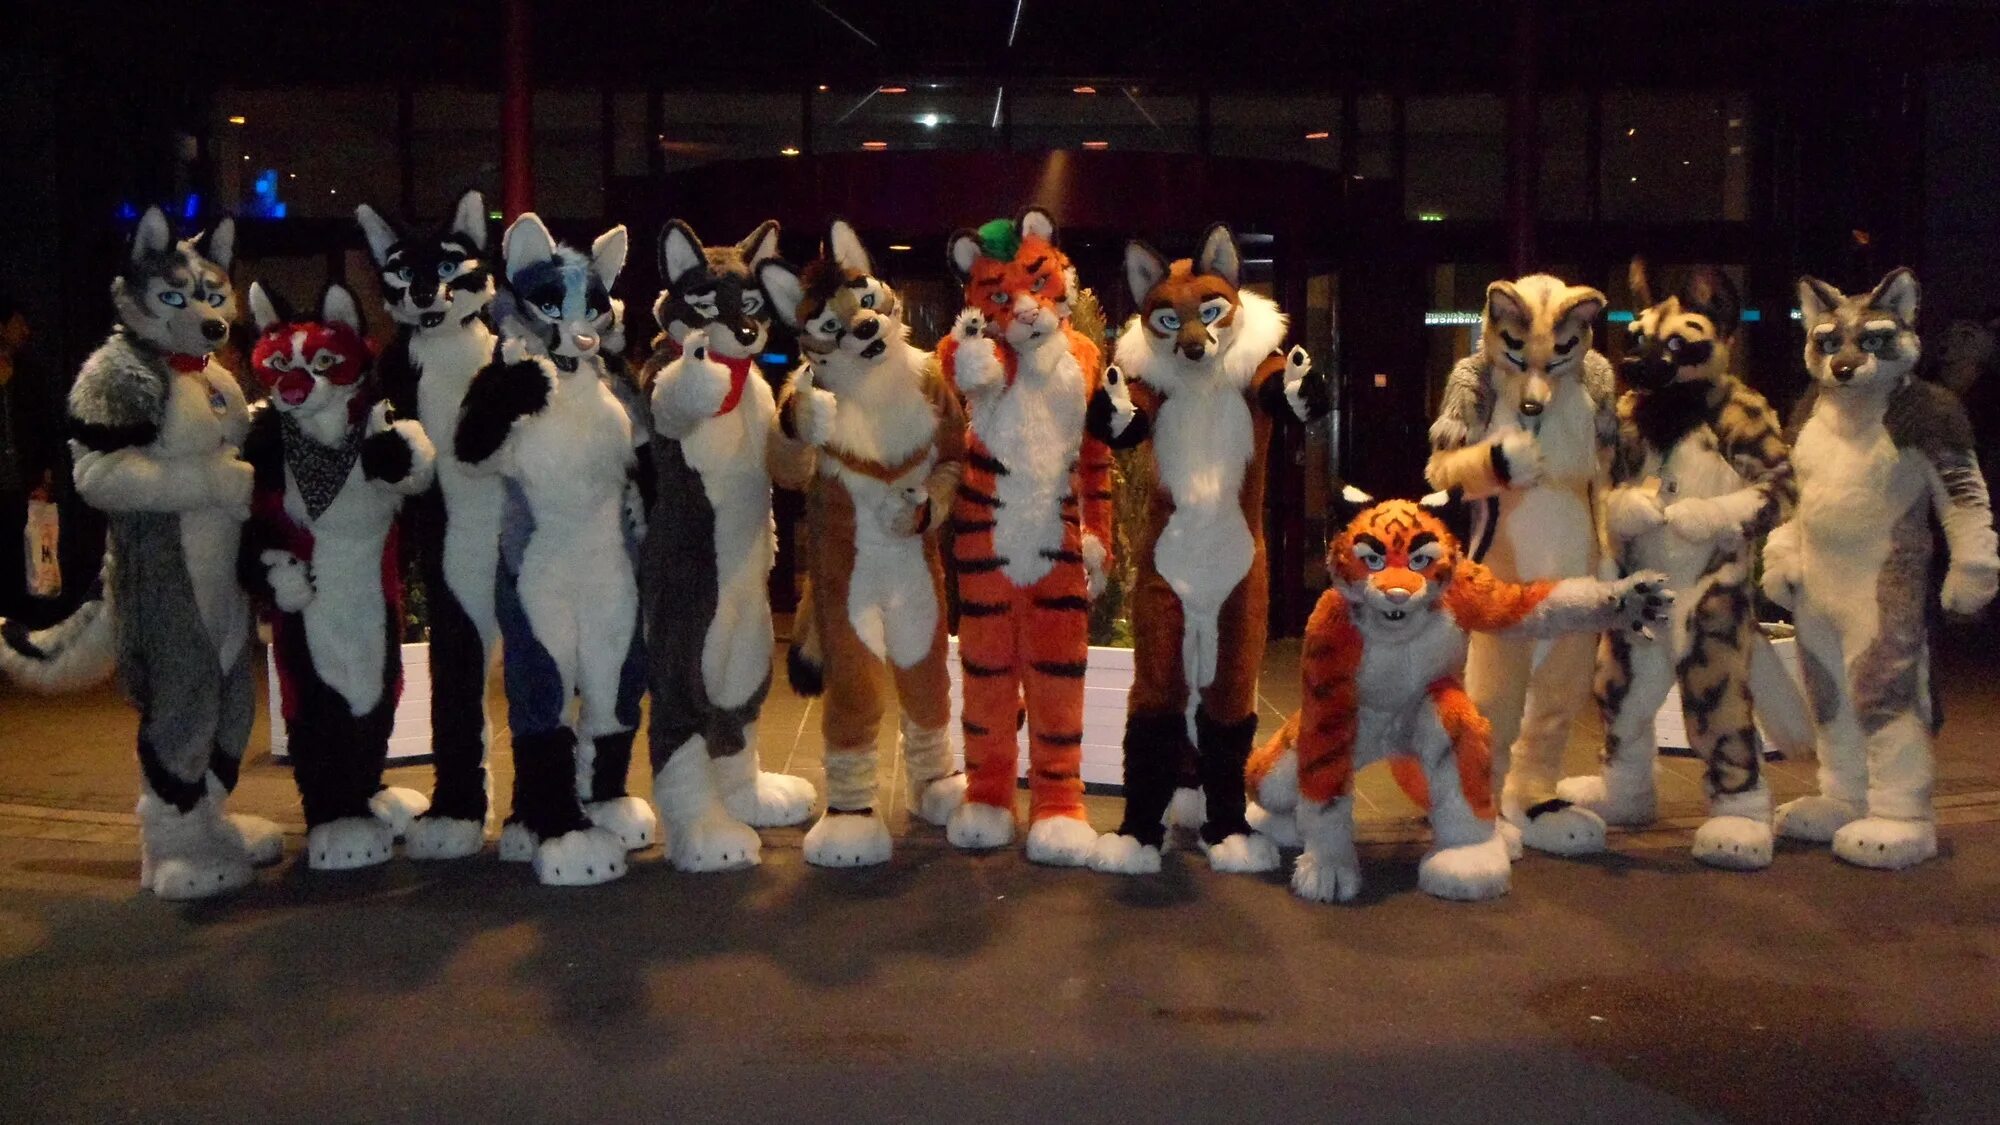 Eurofurence. The Paws element концерт. The paws element